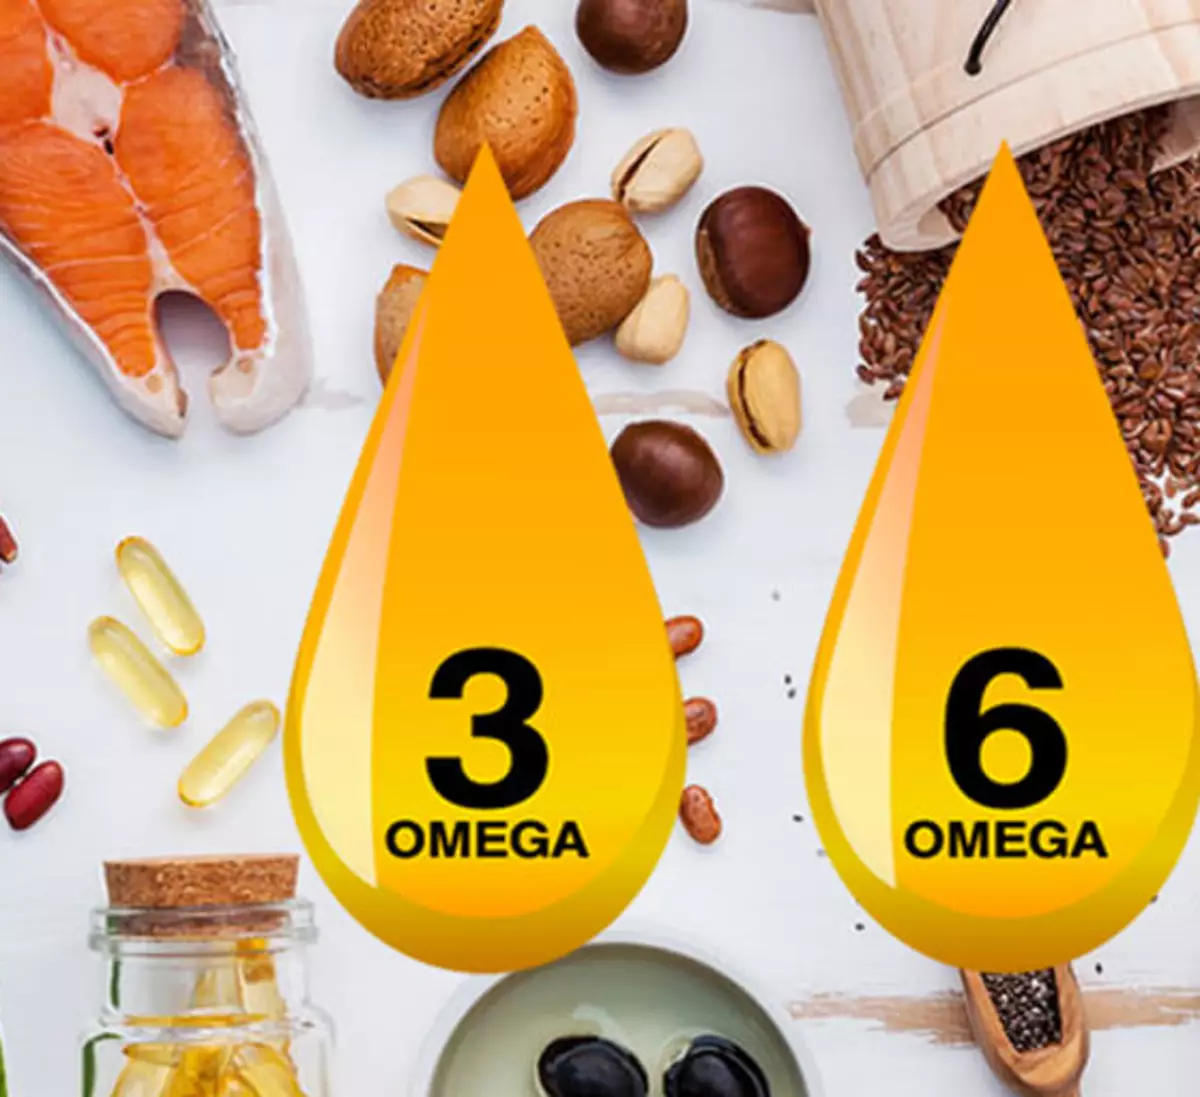 Omega-3 and Omega-6 Fatty Acids: Their Role and Impact on Health